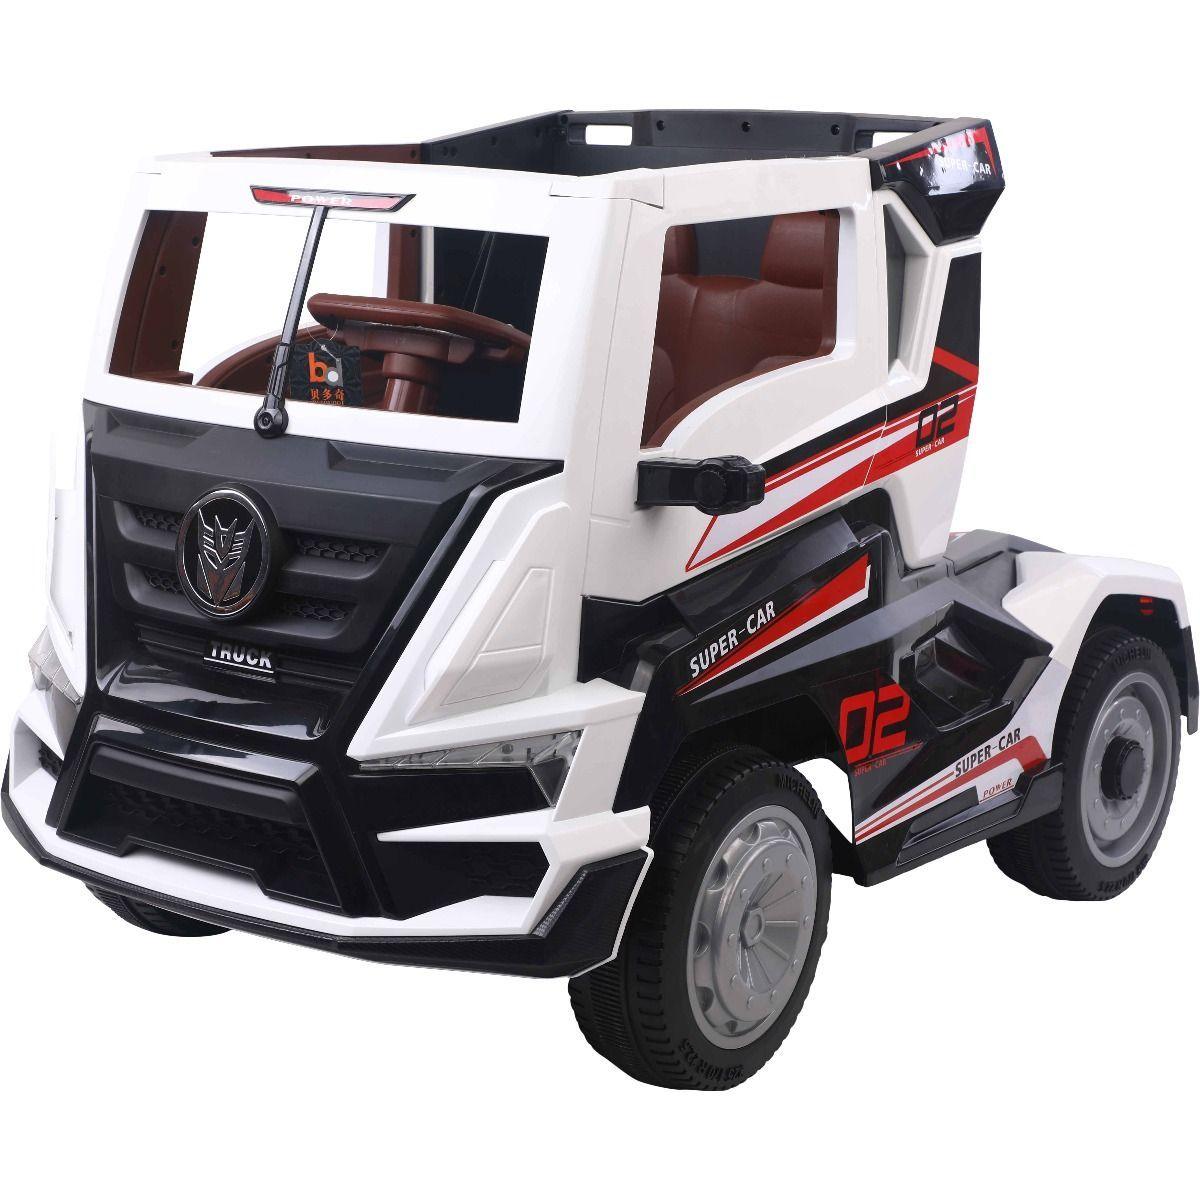 Remote Control Supper Car Transporter Ride-on Childrens Lorry with Trailer - 11Cart